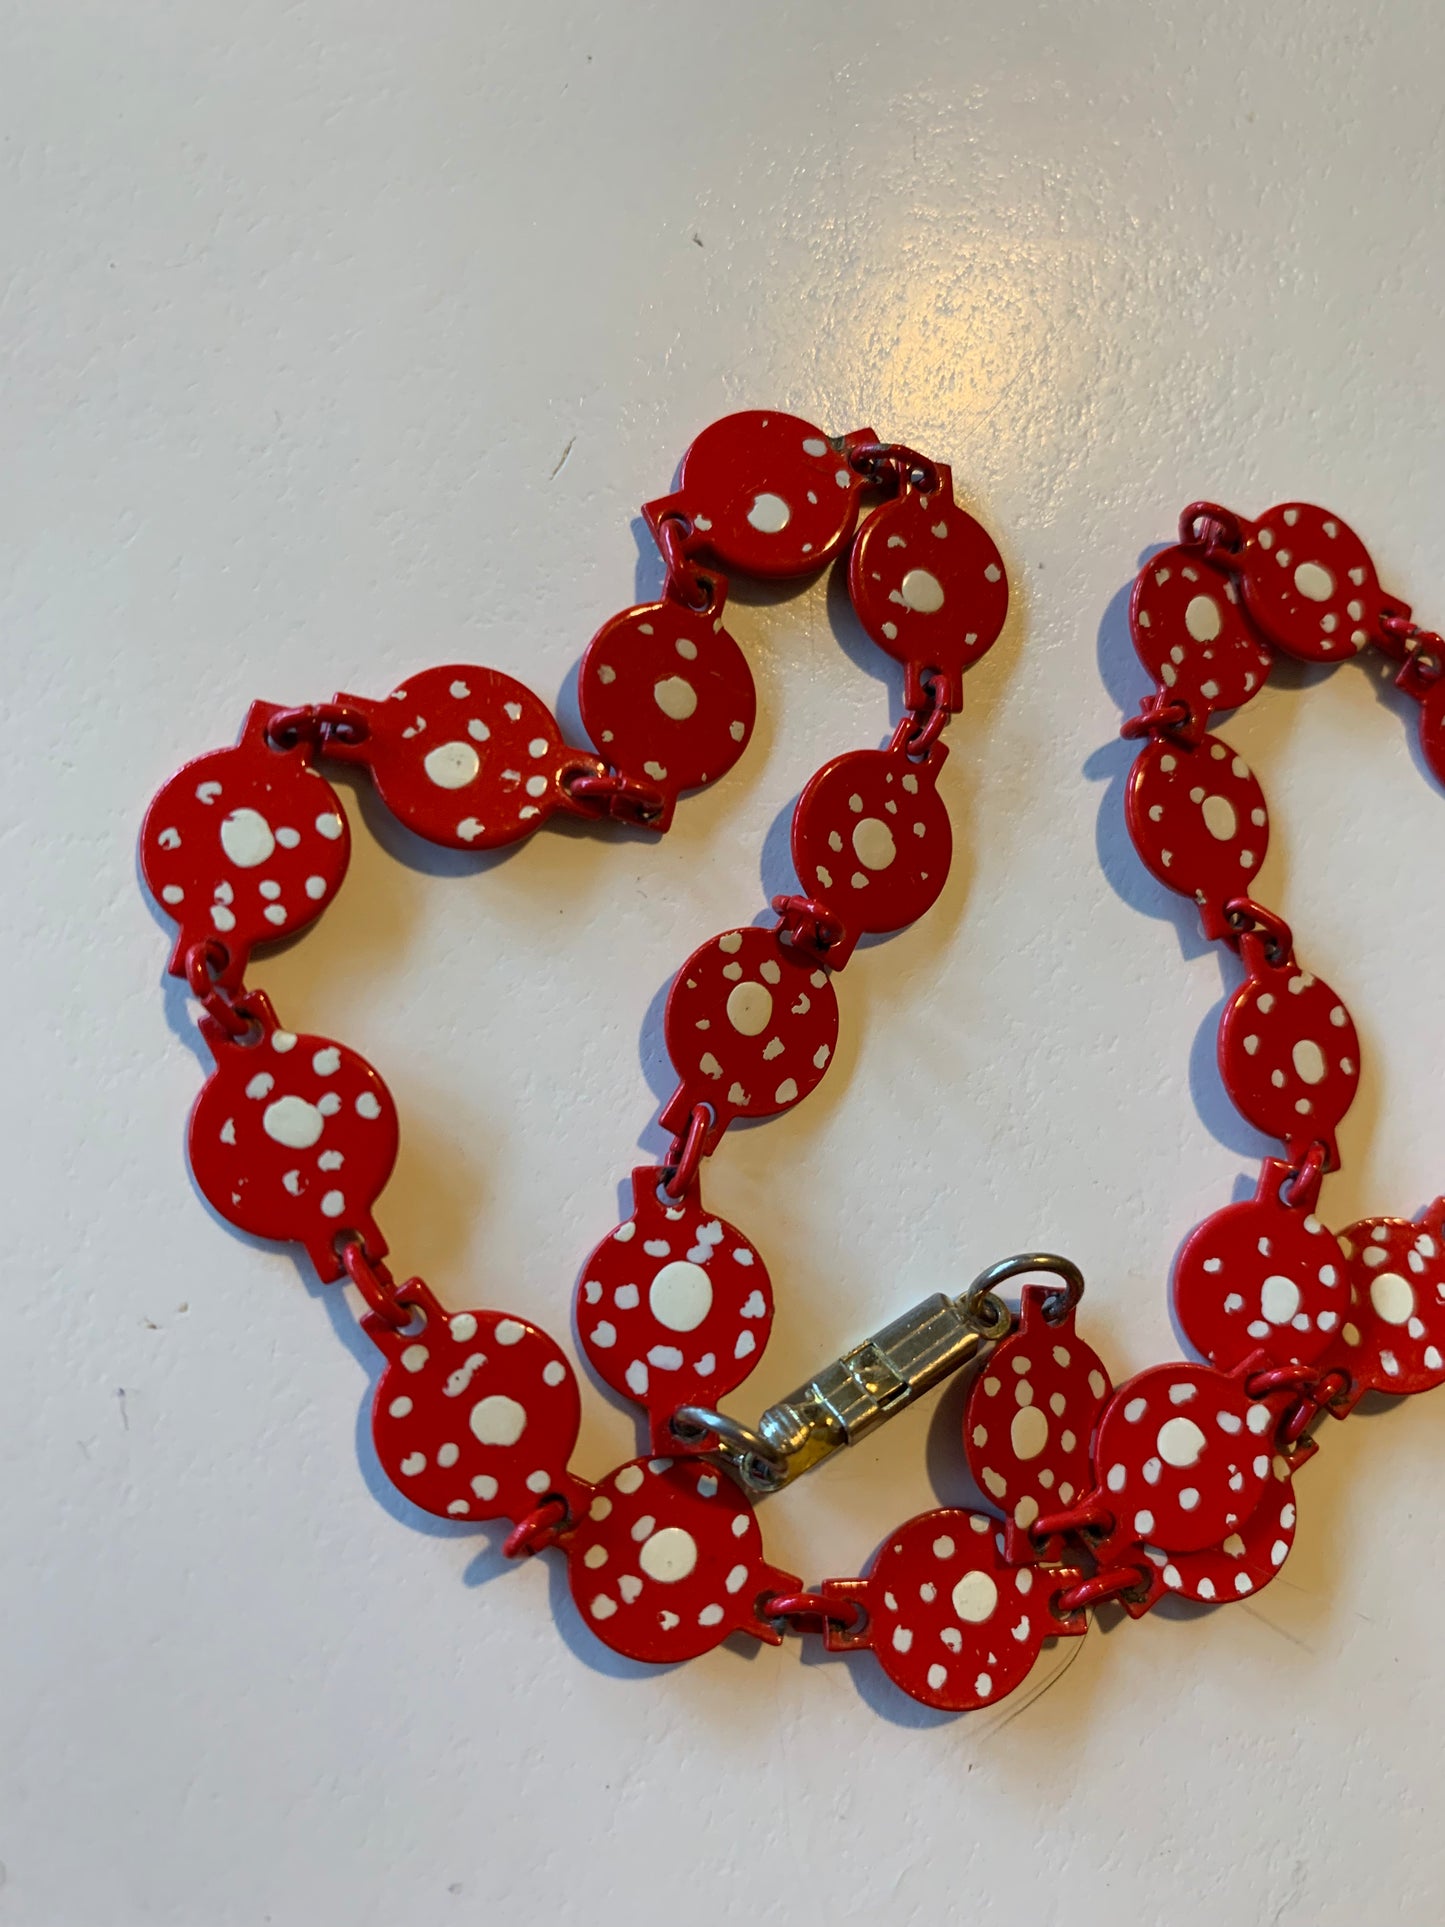 Red and White Polka Dot Enameled Metal Link Choker Necklace circa 1940s